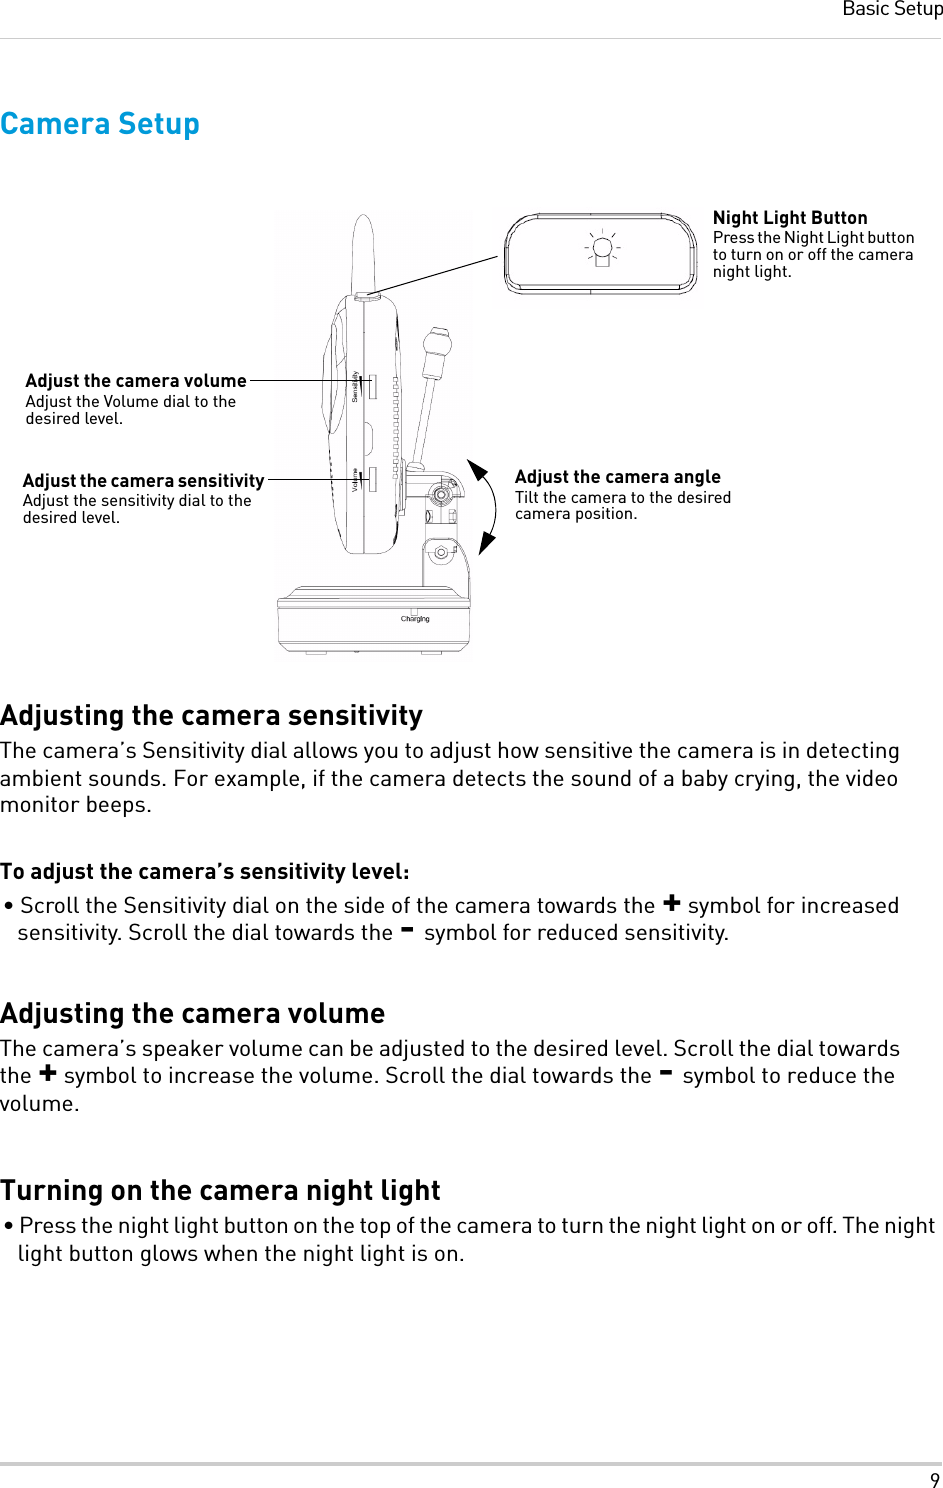 9Basic SetupCamera SetupAdjusting the camera sensitivityThe camera’s Sensitivity dial allows you to adjust how sensitive the camera is in detecting ambient sounds. For example, if the camera detects the sound of a baby crying, the video monitor beeps. To adjust the camera’s sensitivity level:• Scroll the Sensitivity dial on the side of the camera towards the + symbol for increased sensitivity. Scroll the dial towards the - symbol for reduced sensitivity.Adjusting the camera volumeThe camera’s speaker volume can be adjusted to the desired level. Scroll the dial towards the + symbol to increase the volume. Scroll the dial towards the - symbol to reduce the volume.Turning on the camera night light• Press the night light button on the top of the camera to turn the night light on or off. The night light button glows when the night light is on.Night Light ButtonPress the Night Light button to turn on or off the camera night light.Adjust the camera volumeAdjust the Volume dial to the desired level.Adjust the camera angleTilt the camera to the desired camera position.Adjust the camera sensitivityAdjust the sensitivity dial to the desired level.